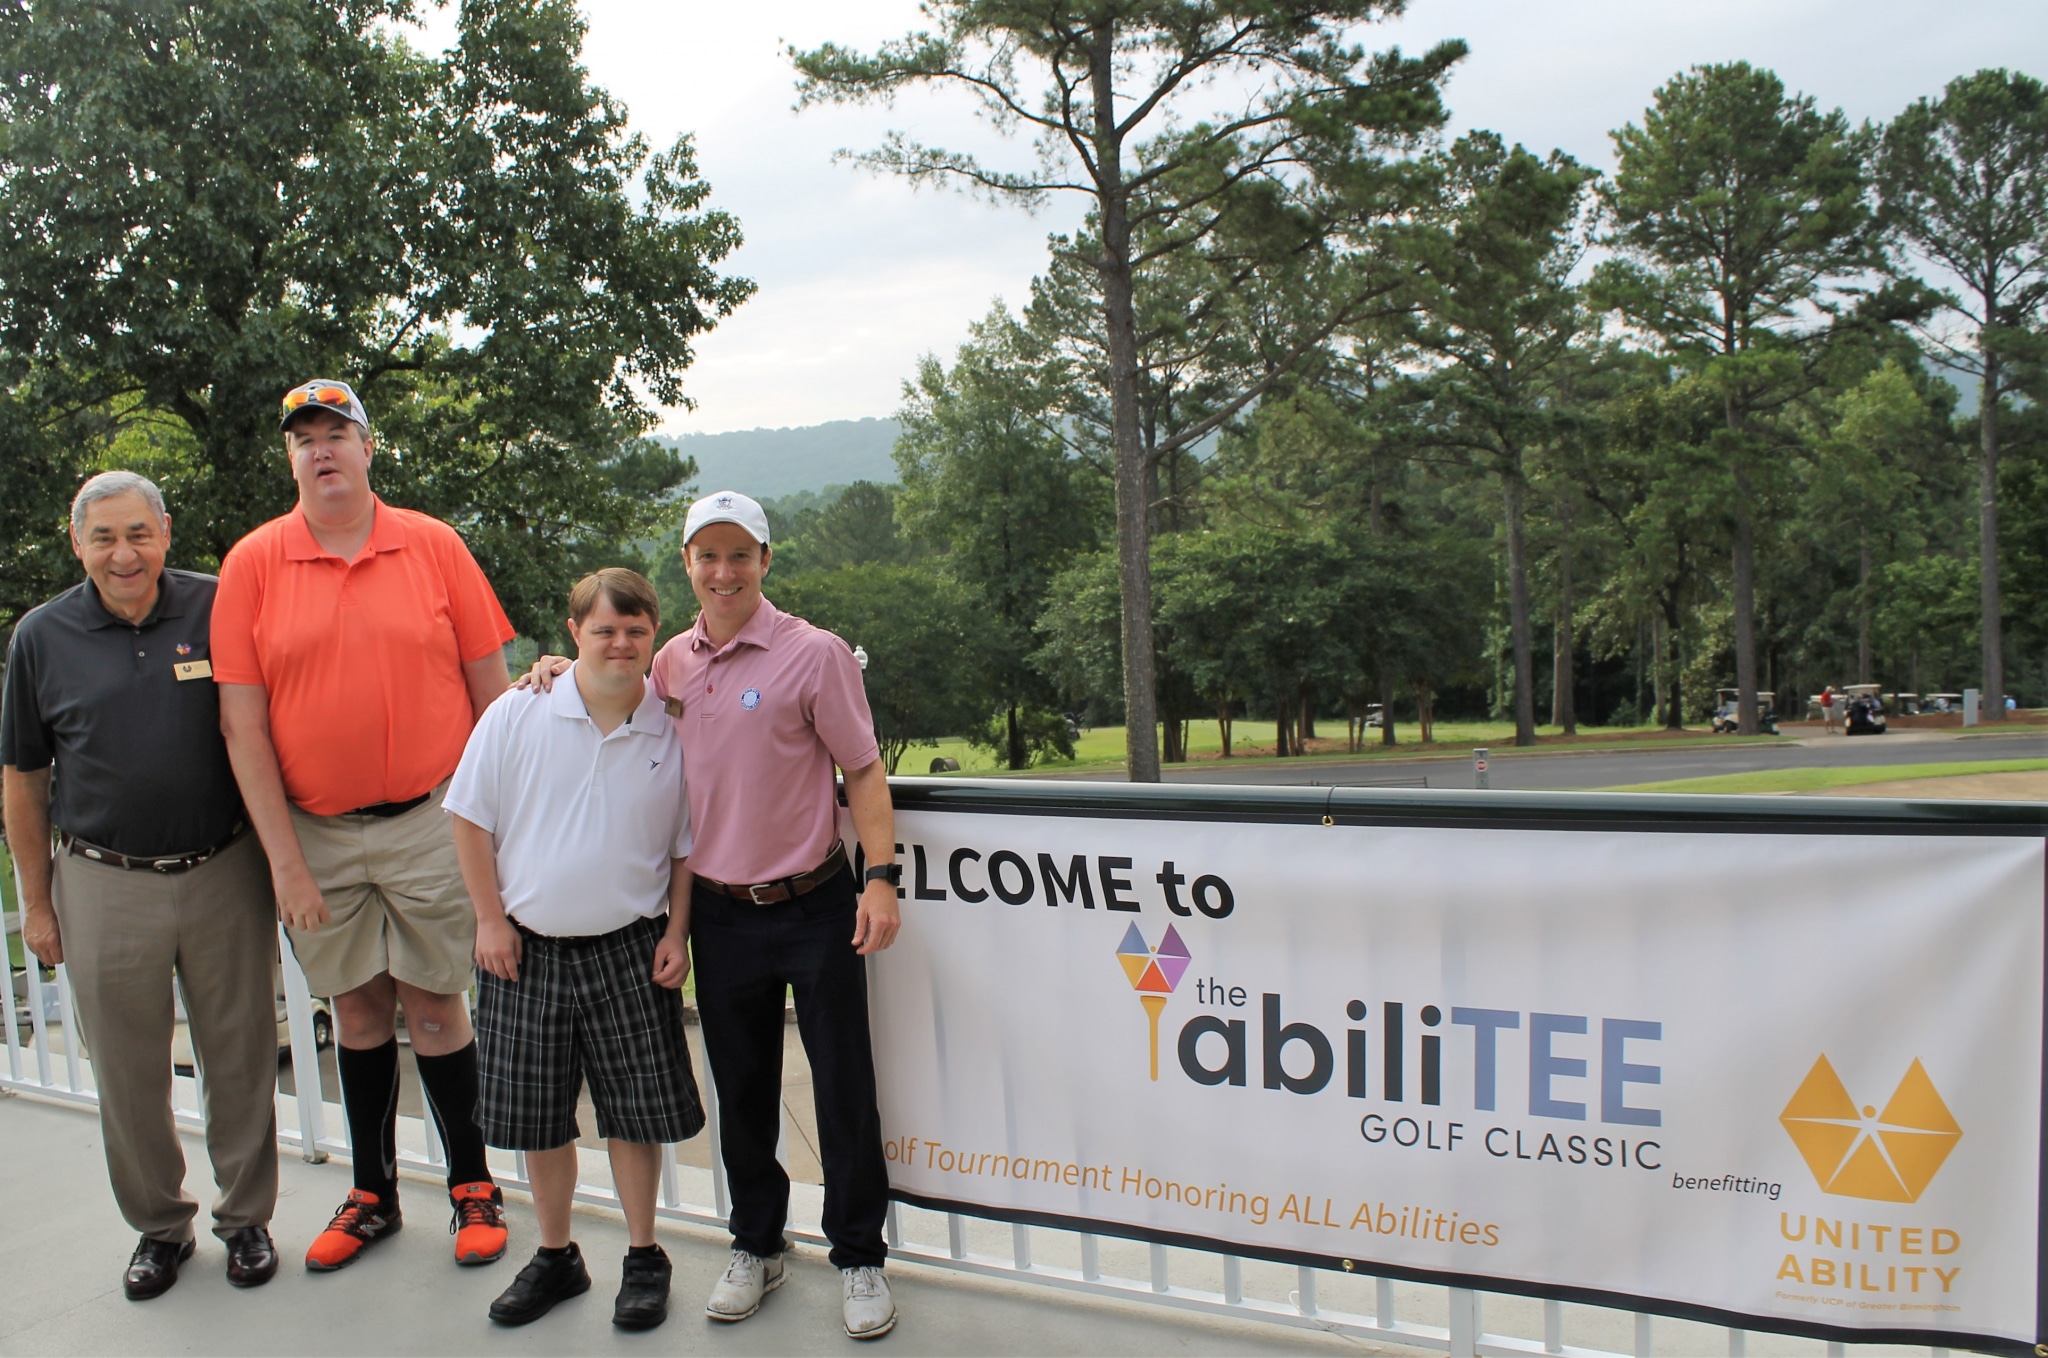 golf 1 Move over Bo Jackson. Meet two-sport athlete Chris Biggins at United Ability’s abiliTEE on April 25